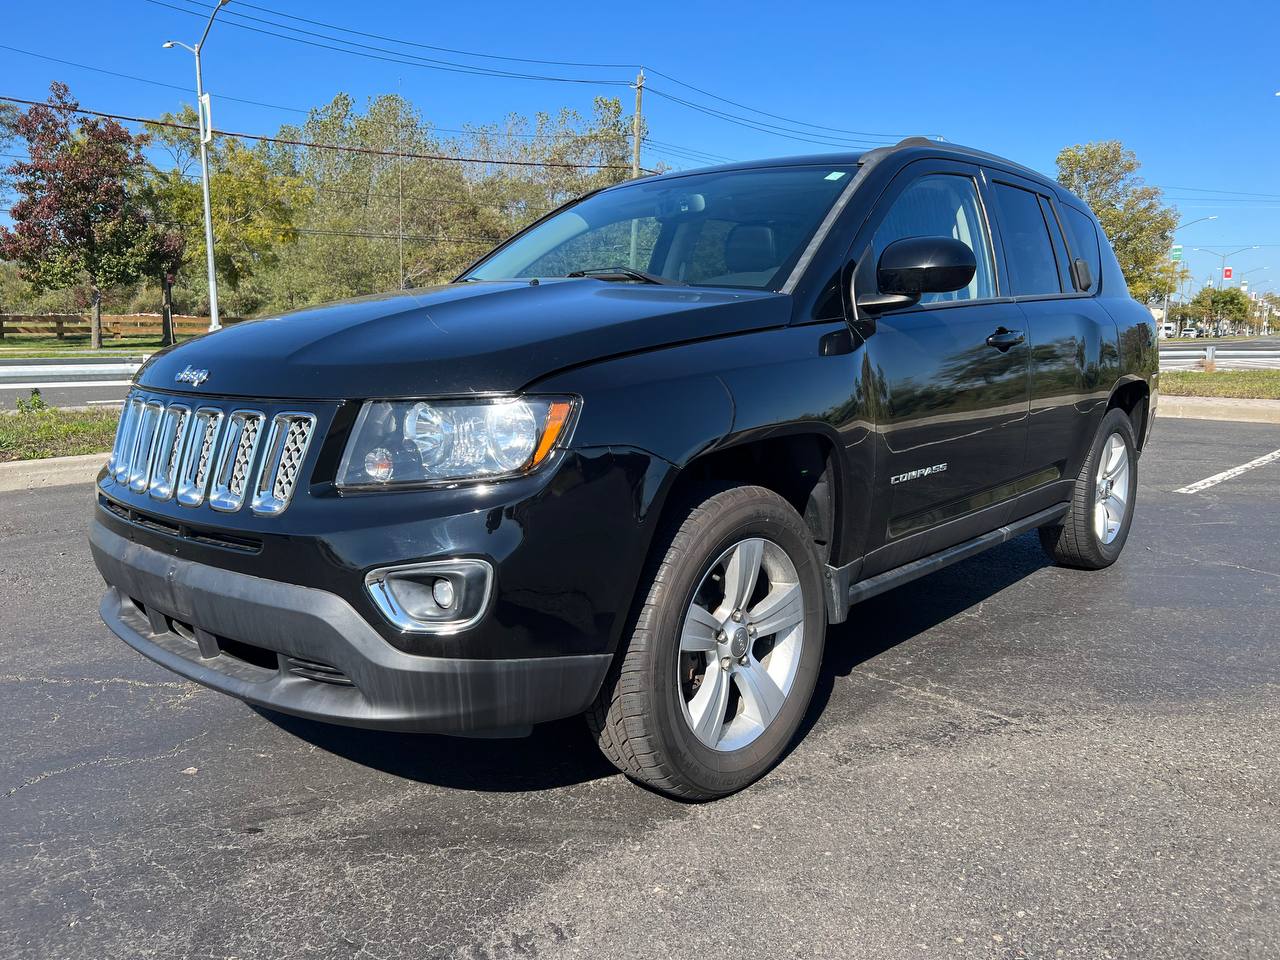 Used Car - 2015 Jeep Compass Latitude 4x4 for Sale in Staten Island, NY